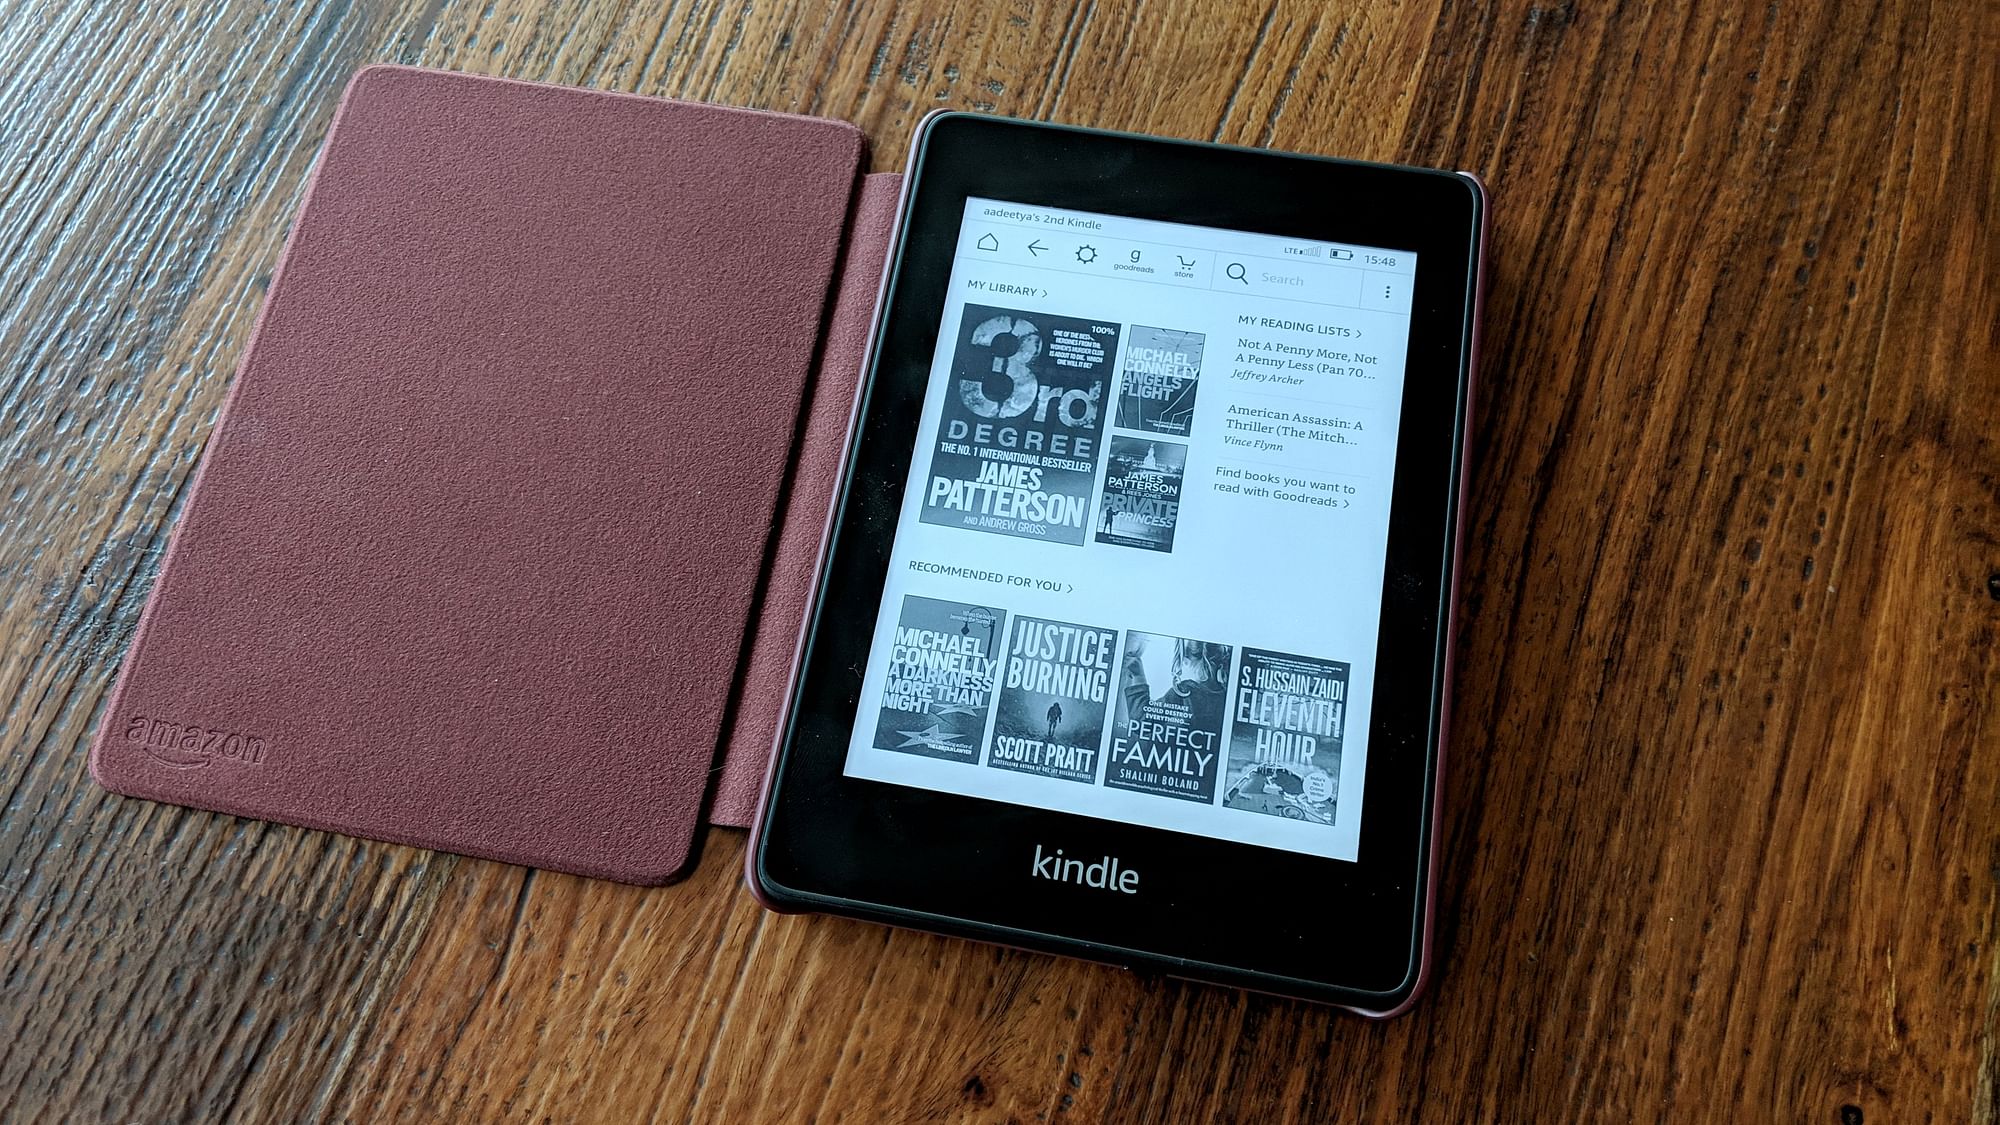 Kindle Paperwhite 4G from Amazon gets new features.